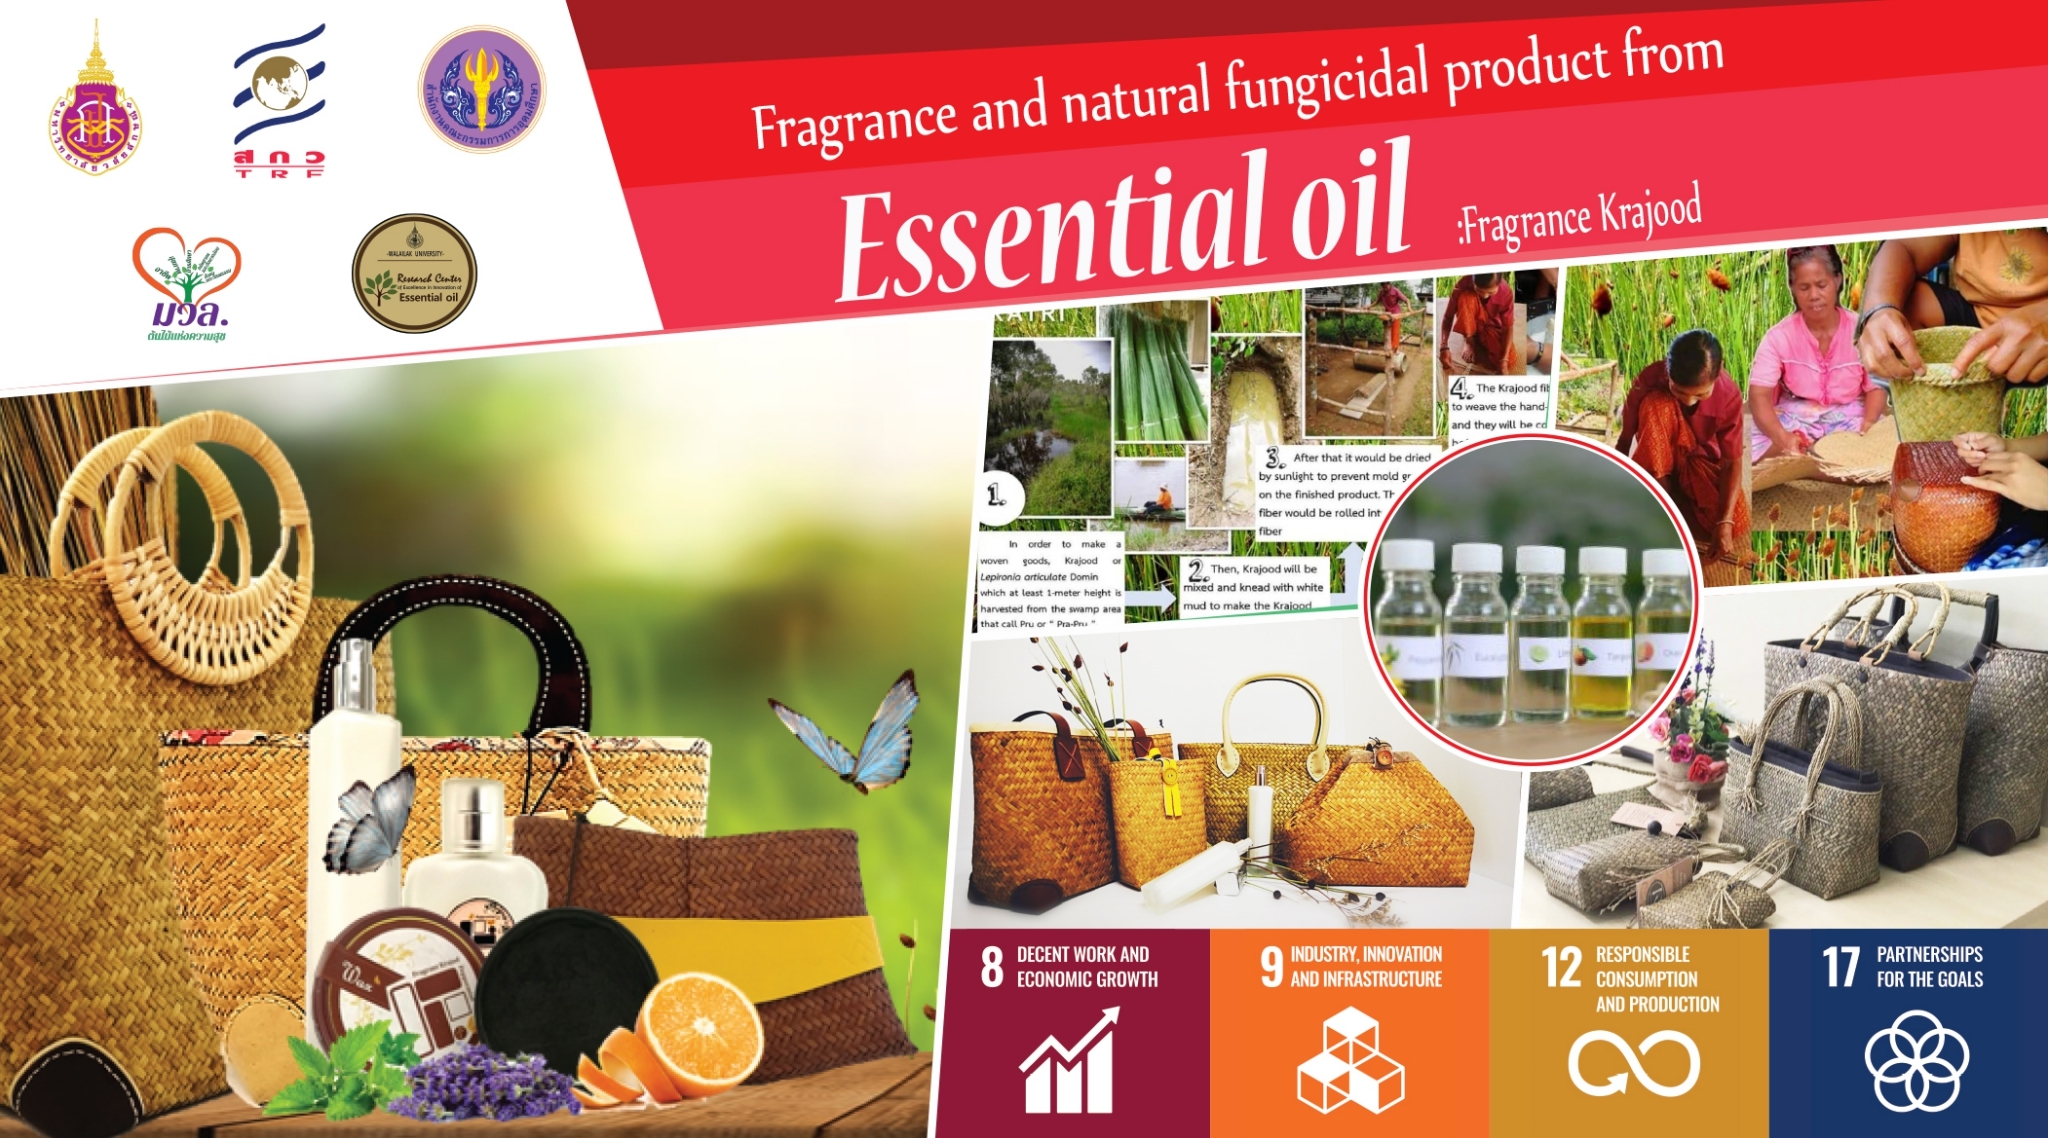 Fragrance and natural fungicidal product from Essential oil :Fragrance Krajood